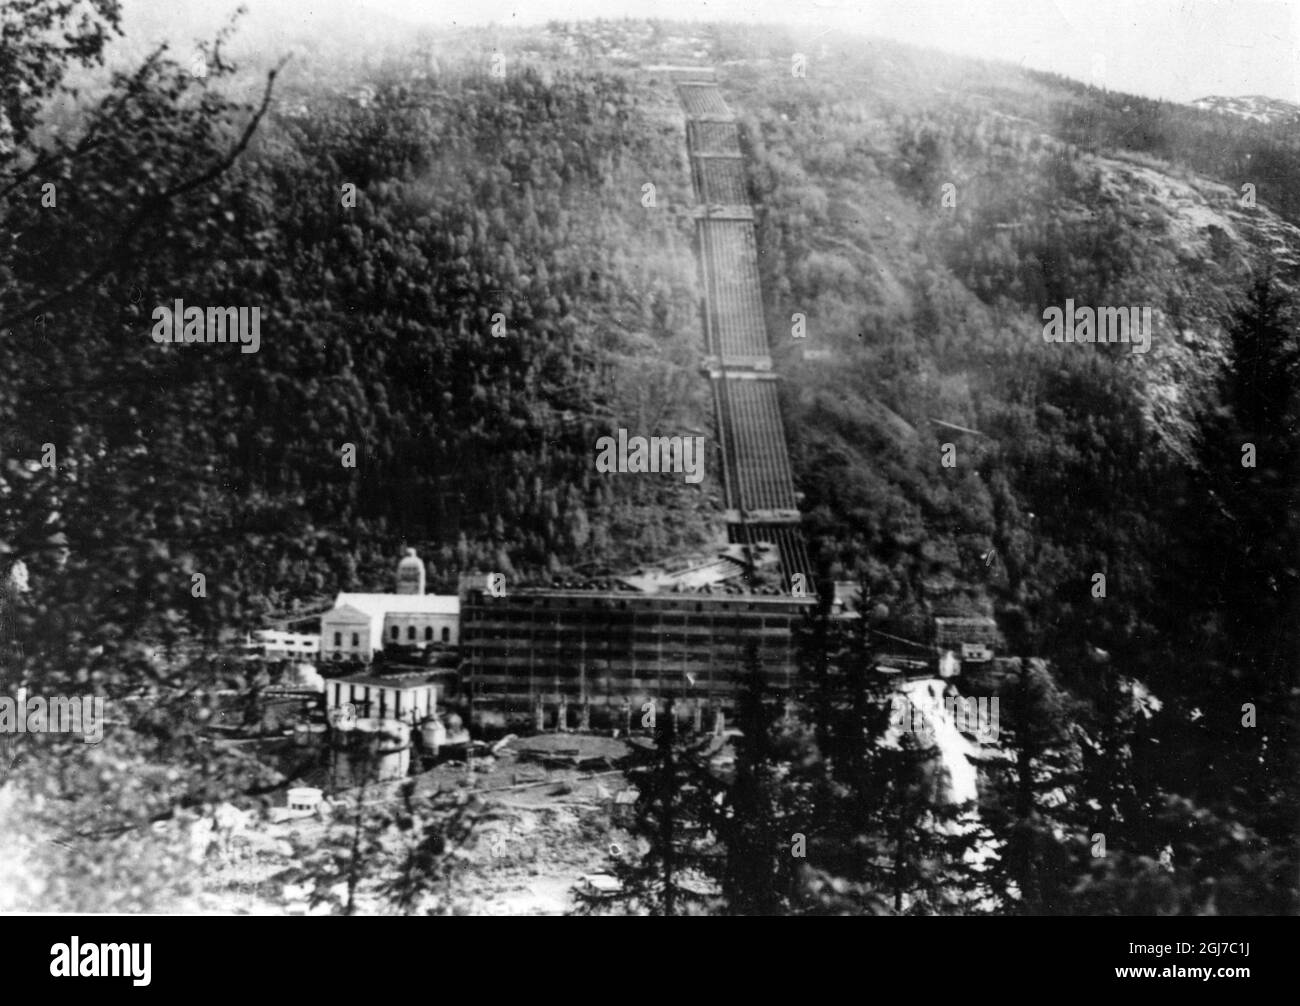 This is a photo (exact date unknown) of the heavy water plant at Rjukan on Vemork which was sabotaged on the night of February 28, 1943. The production of heavy water was of great importance for the German front. The wall in the foreground is blackened by the explosion and fire. The building was demolished in 1977.  Stock Photo